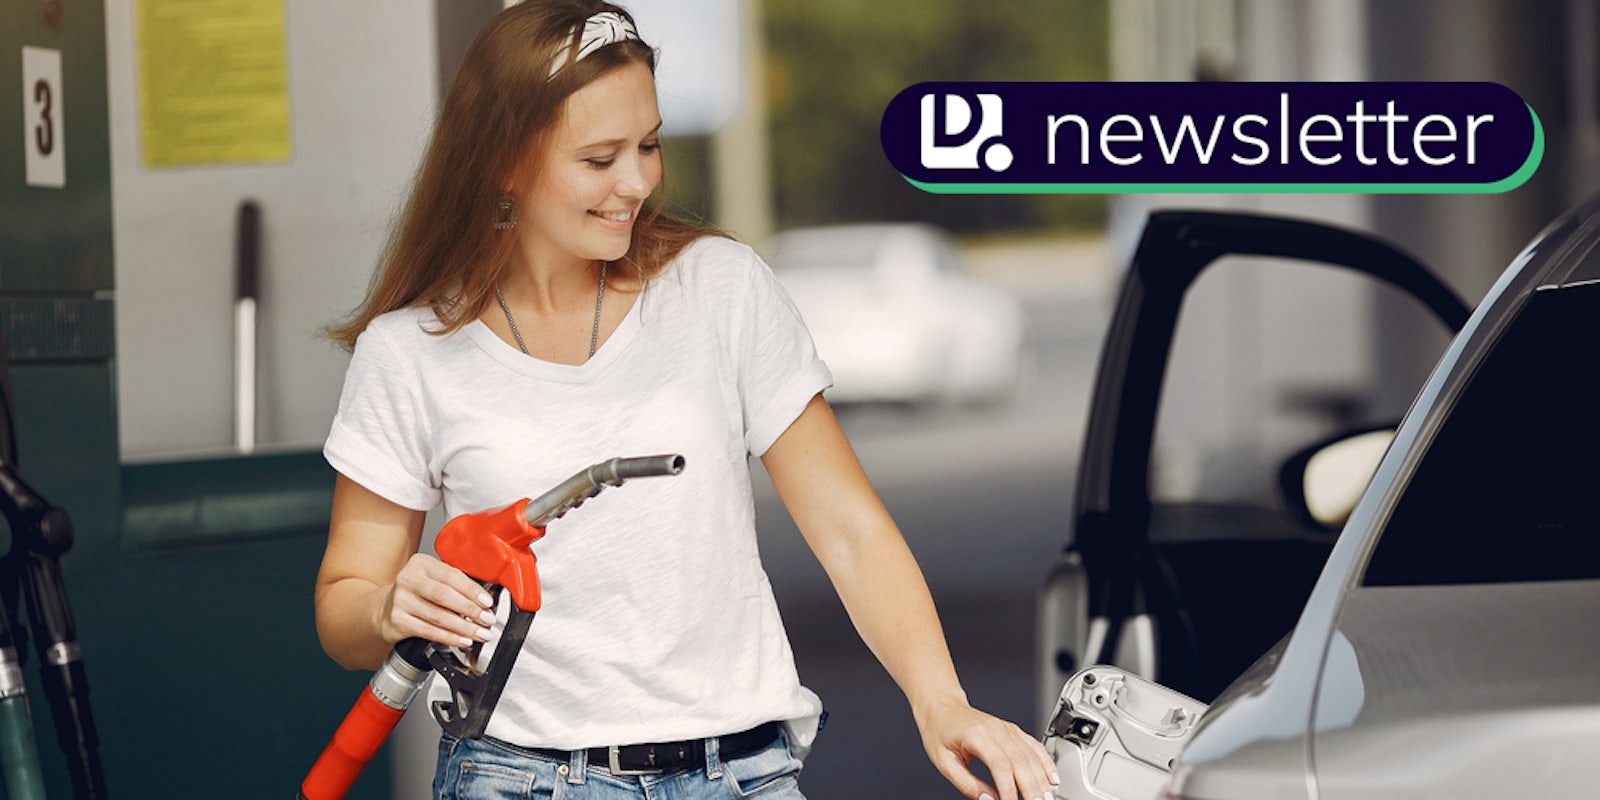 A woman pumping gas into a car. In the top right corner is the Daily Dot newsletter logo.